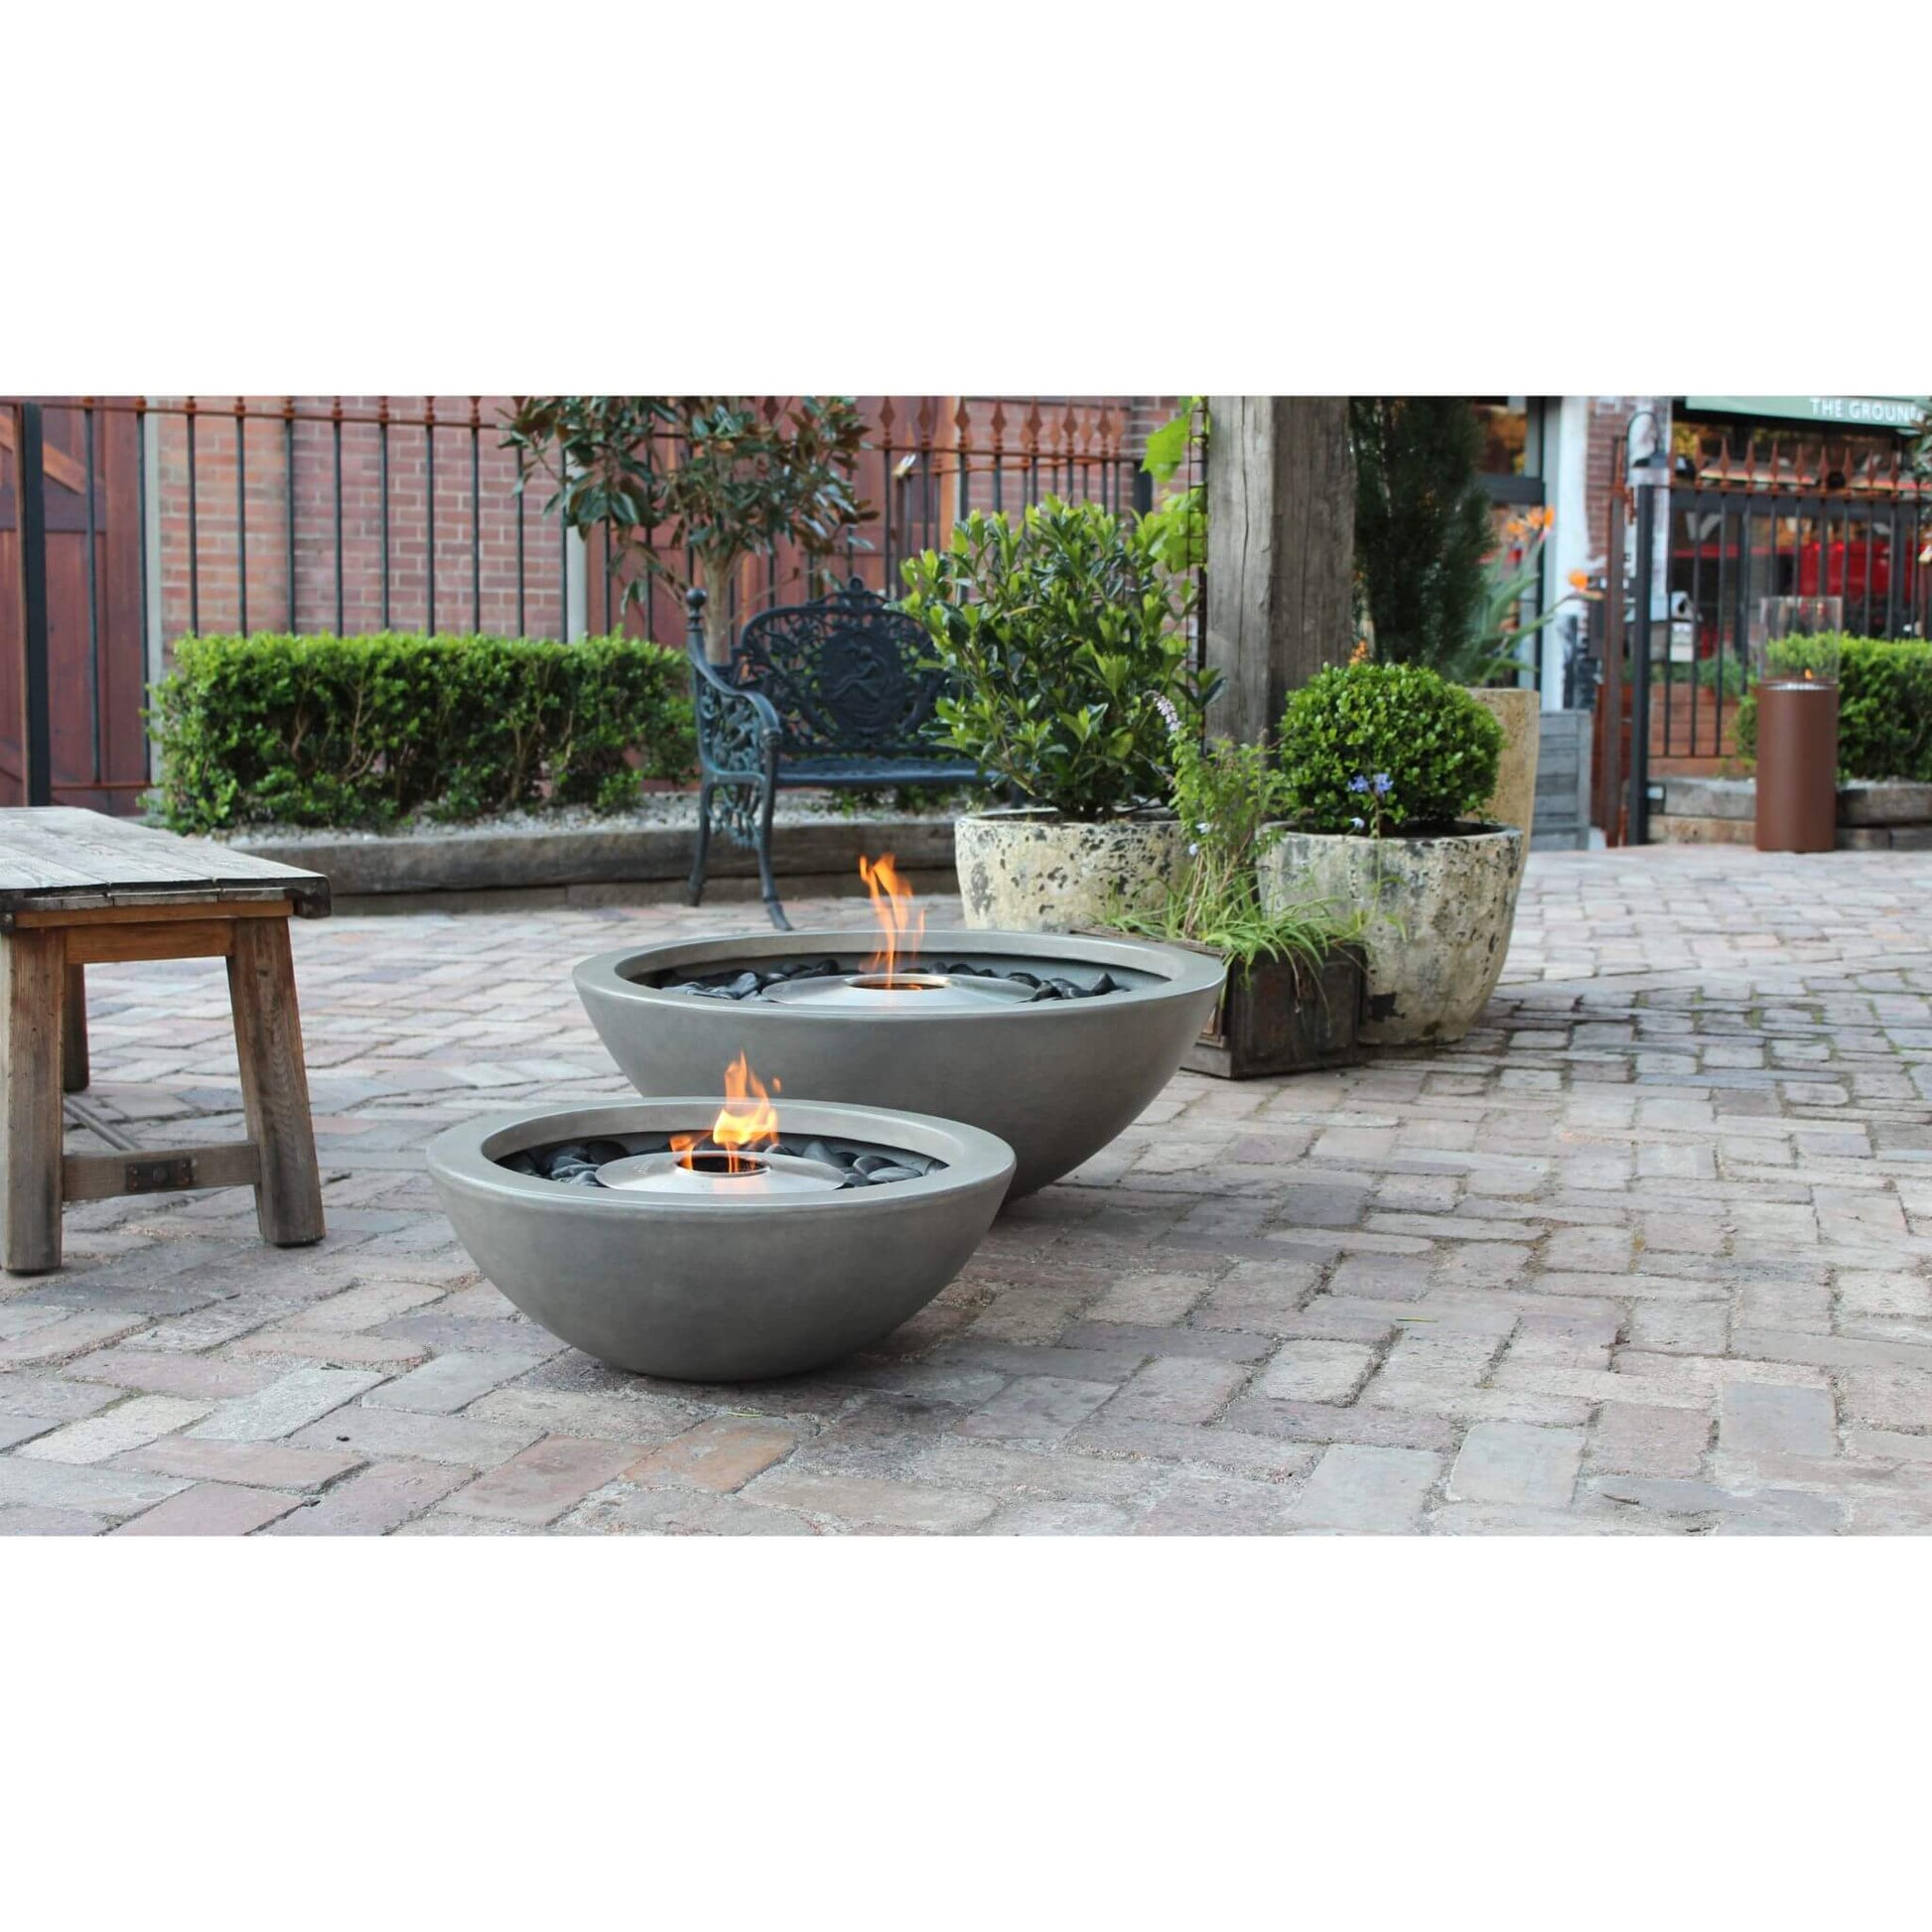 Ecosmart Fire Mix 600 & Mix 850 bioethanol fire pit bowls in grey concrete with stainless steel burner positioned outdoor on patio grounds